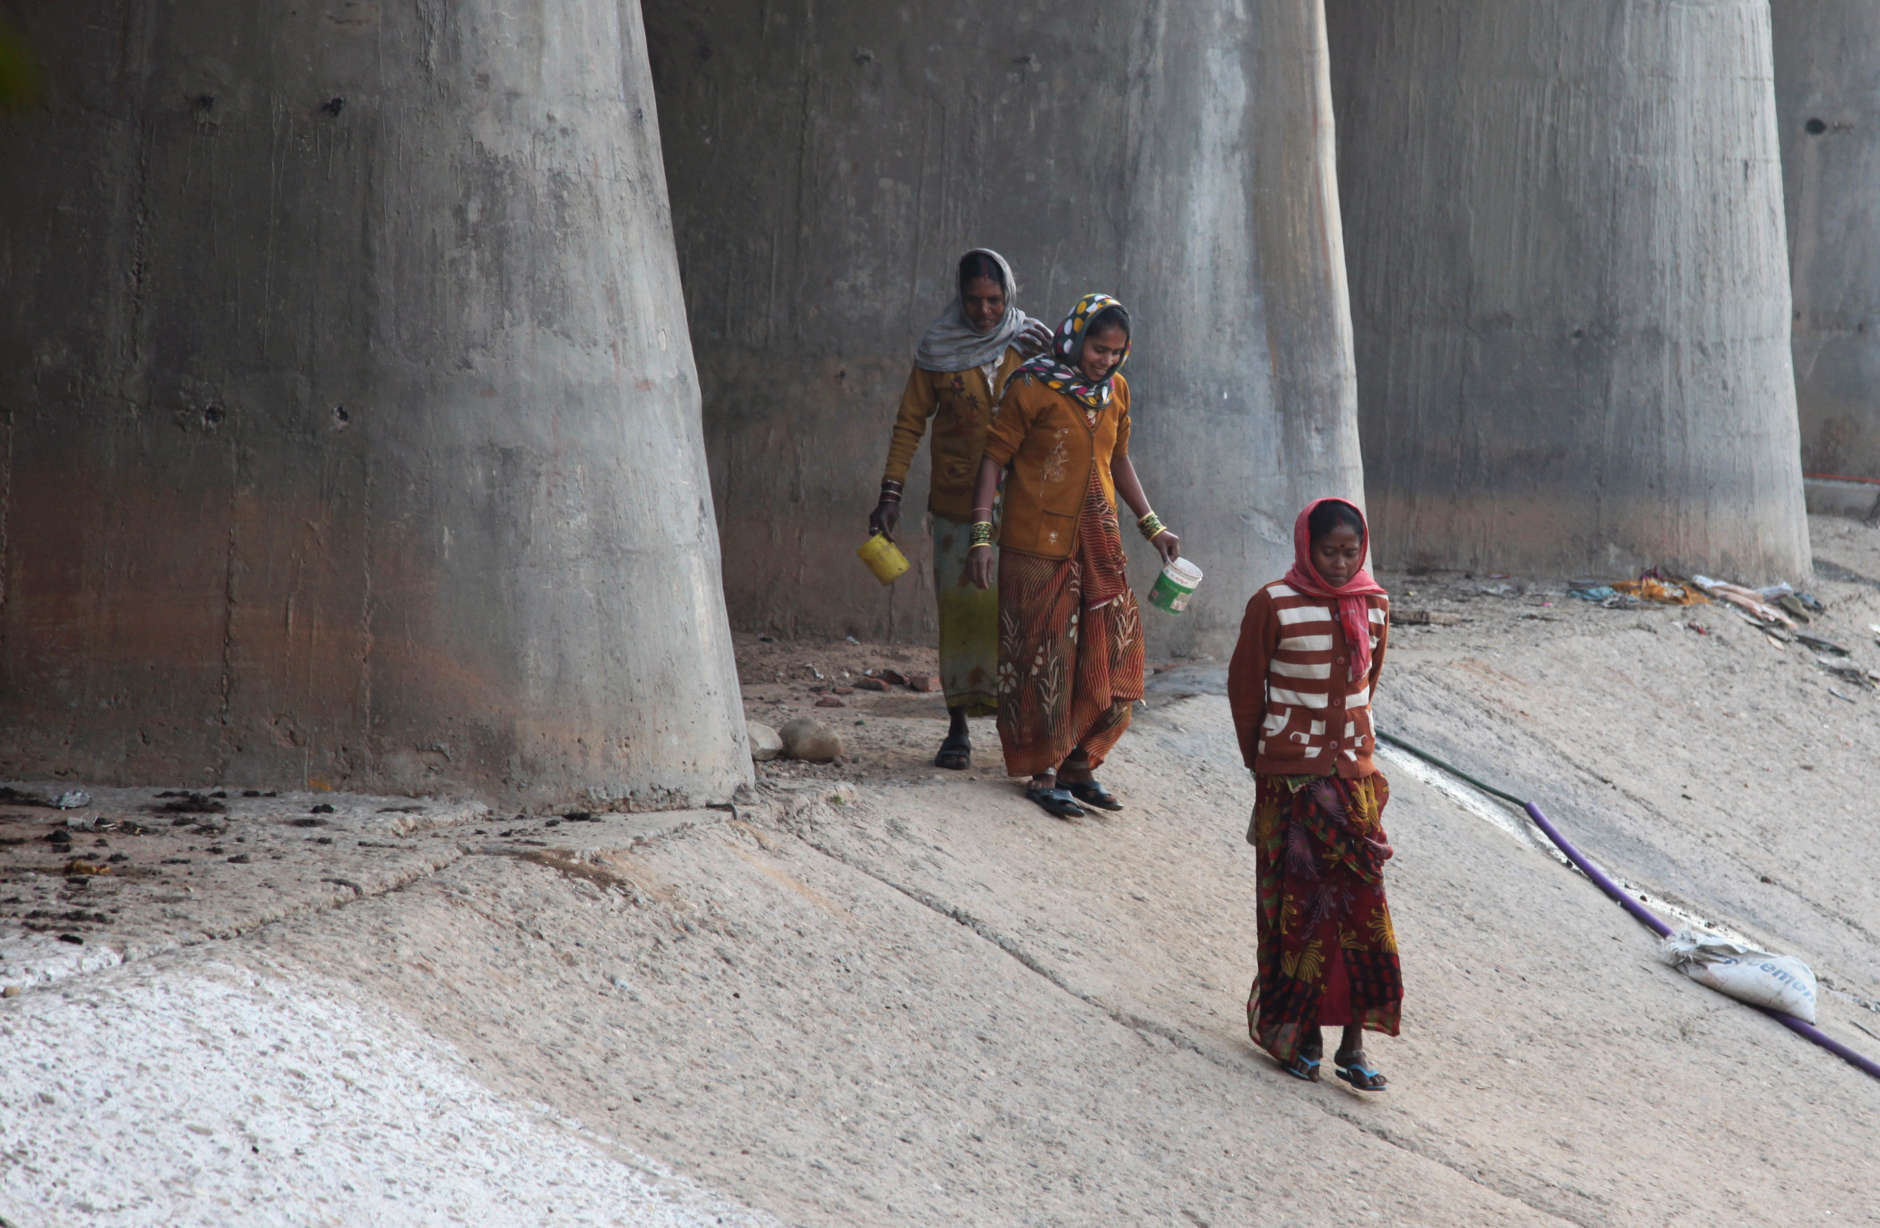 Indian women walk holding tumblers they use to wash themselves after defecating in the open, on World Toilet Day on the outskirts of Jammu, India, Wednesday, Nov. 19, 2014. U.N. figures show of India's 1.2 billion people, 665 million, mostly those in the countryside, don't have access to a private toilet or latrine, something taken for granted in developed nations. Some villages have public bathrooms, but many women avoid using them because they are usually in a state of disrepair and because men often hang around and harass the women. (AP Photo/Channi Anand)